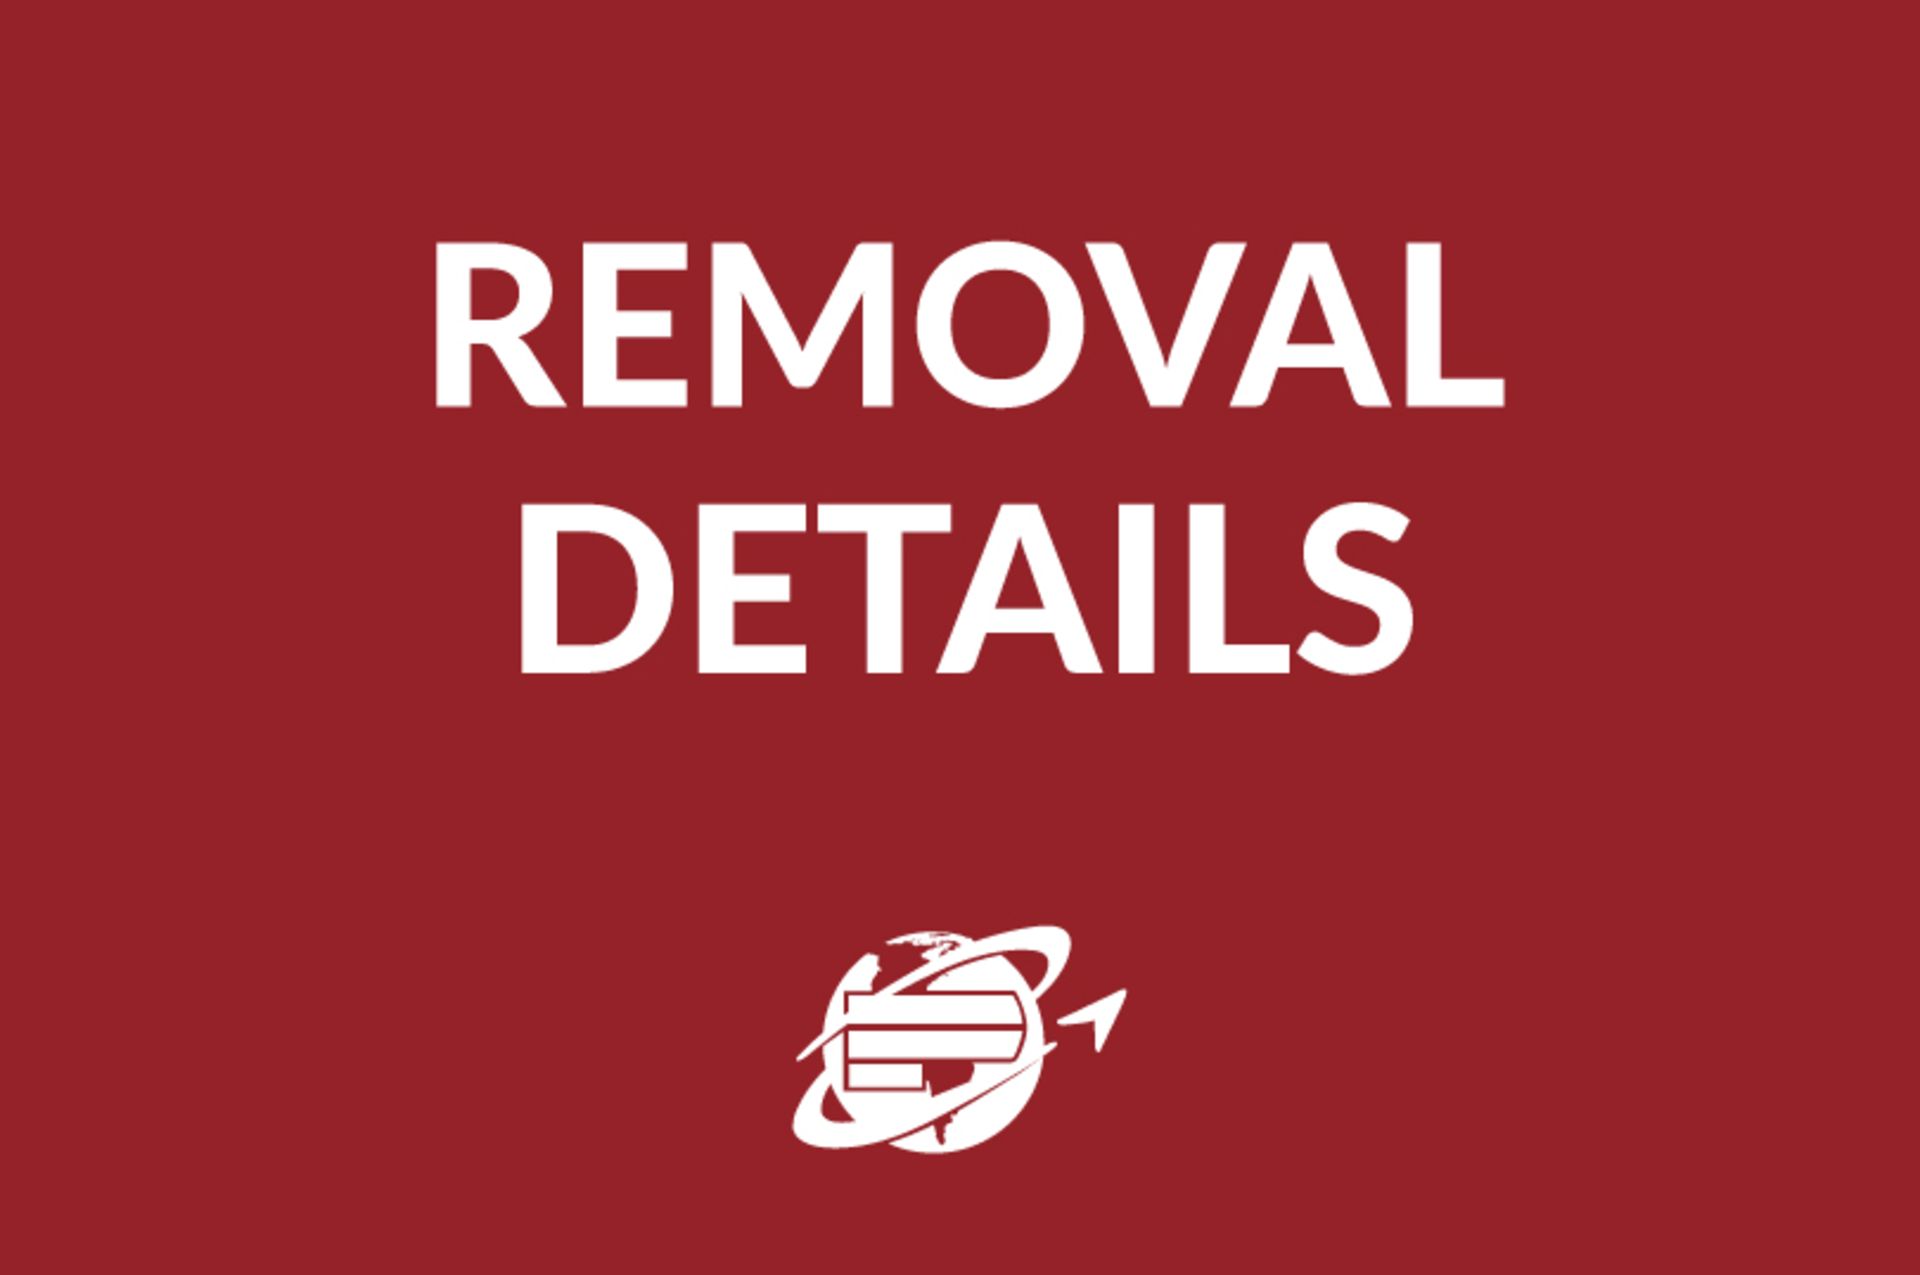 All items must be removed no later than Friday, April 26. Anyone removing purchased items with a lif